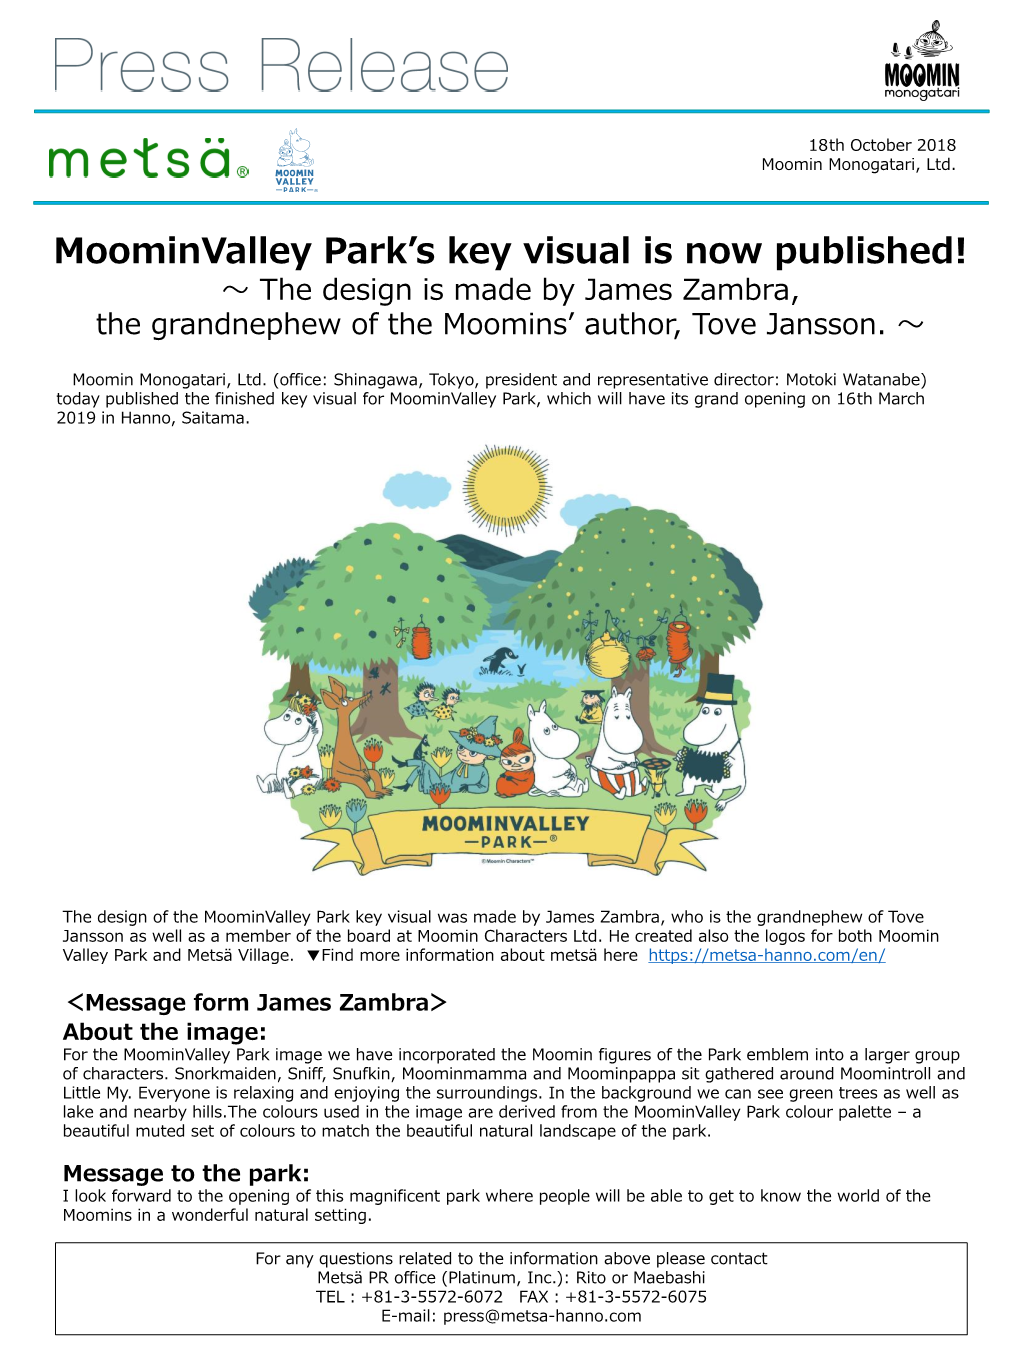 Moominvalley Park's Key Visual Is Now Published!